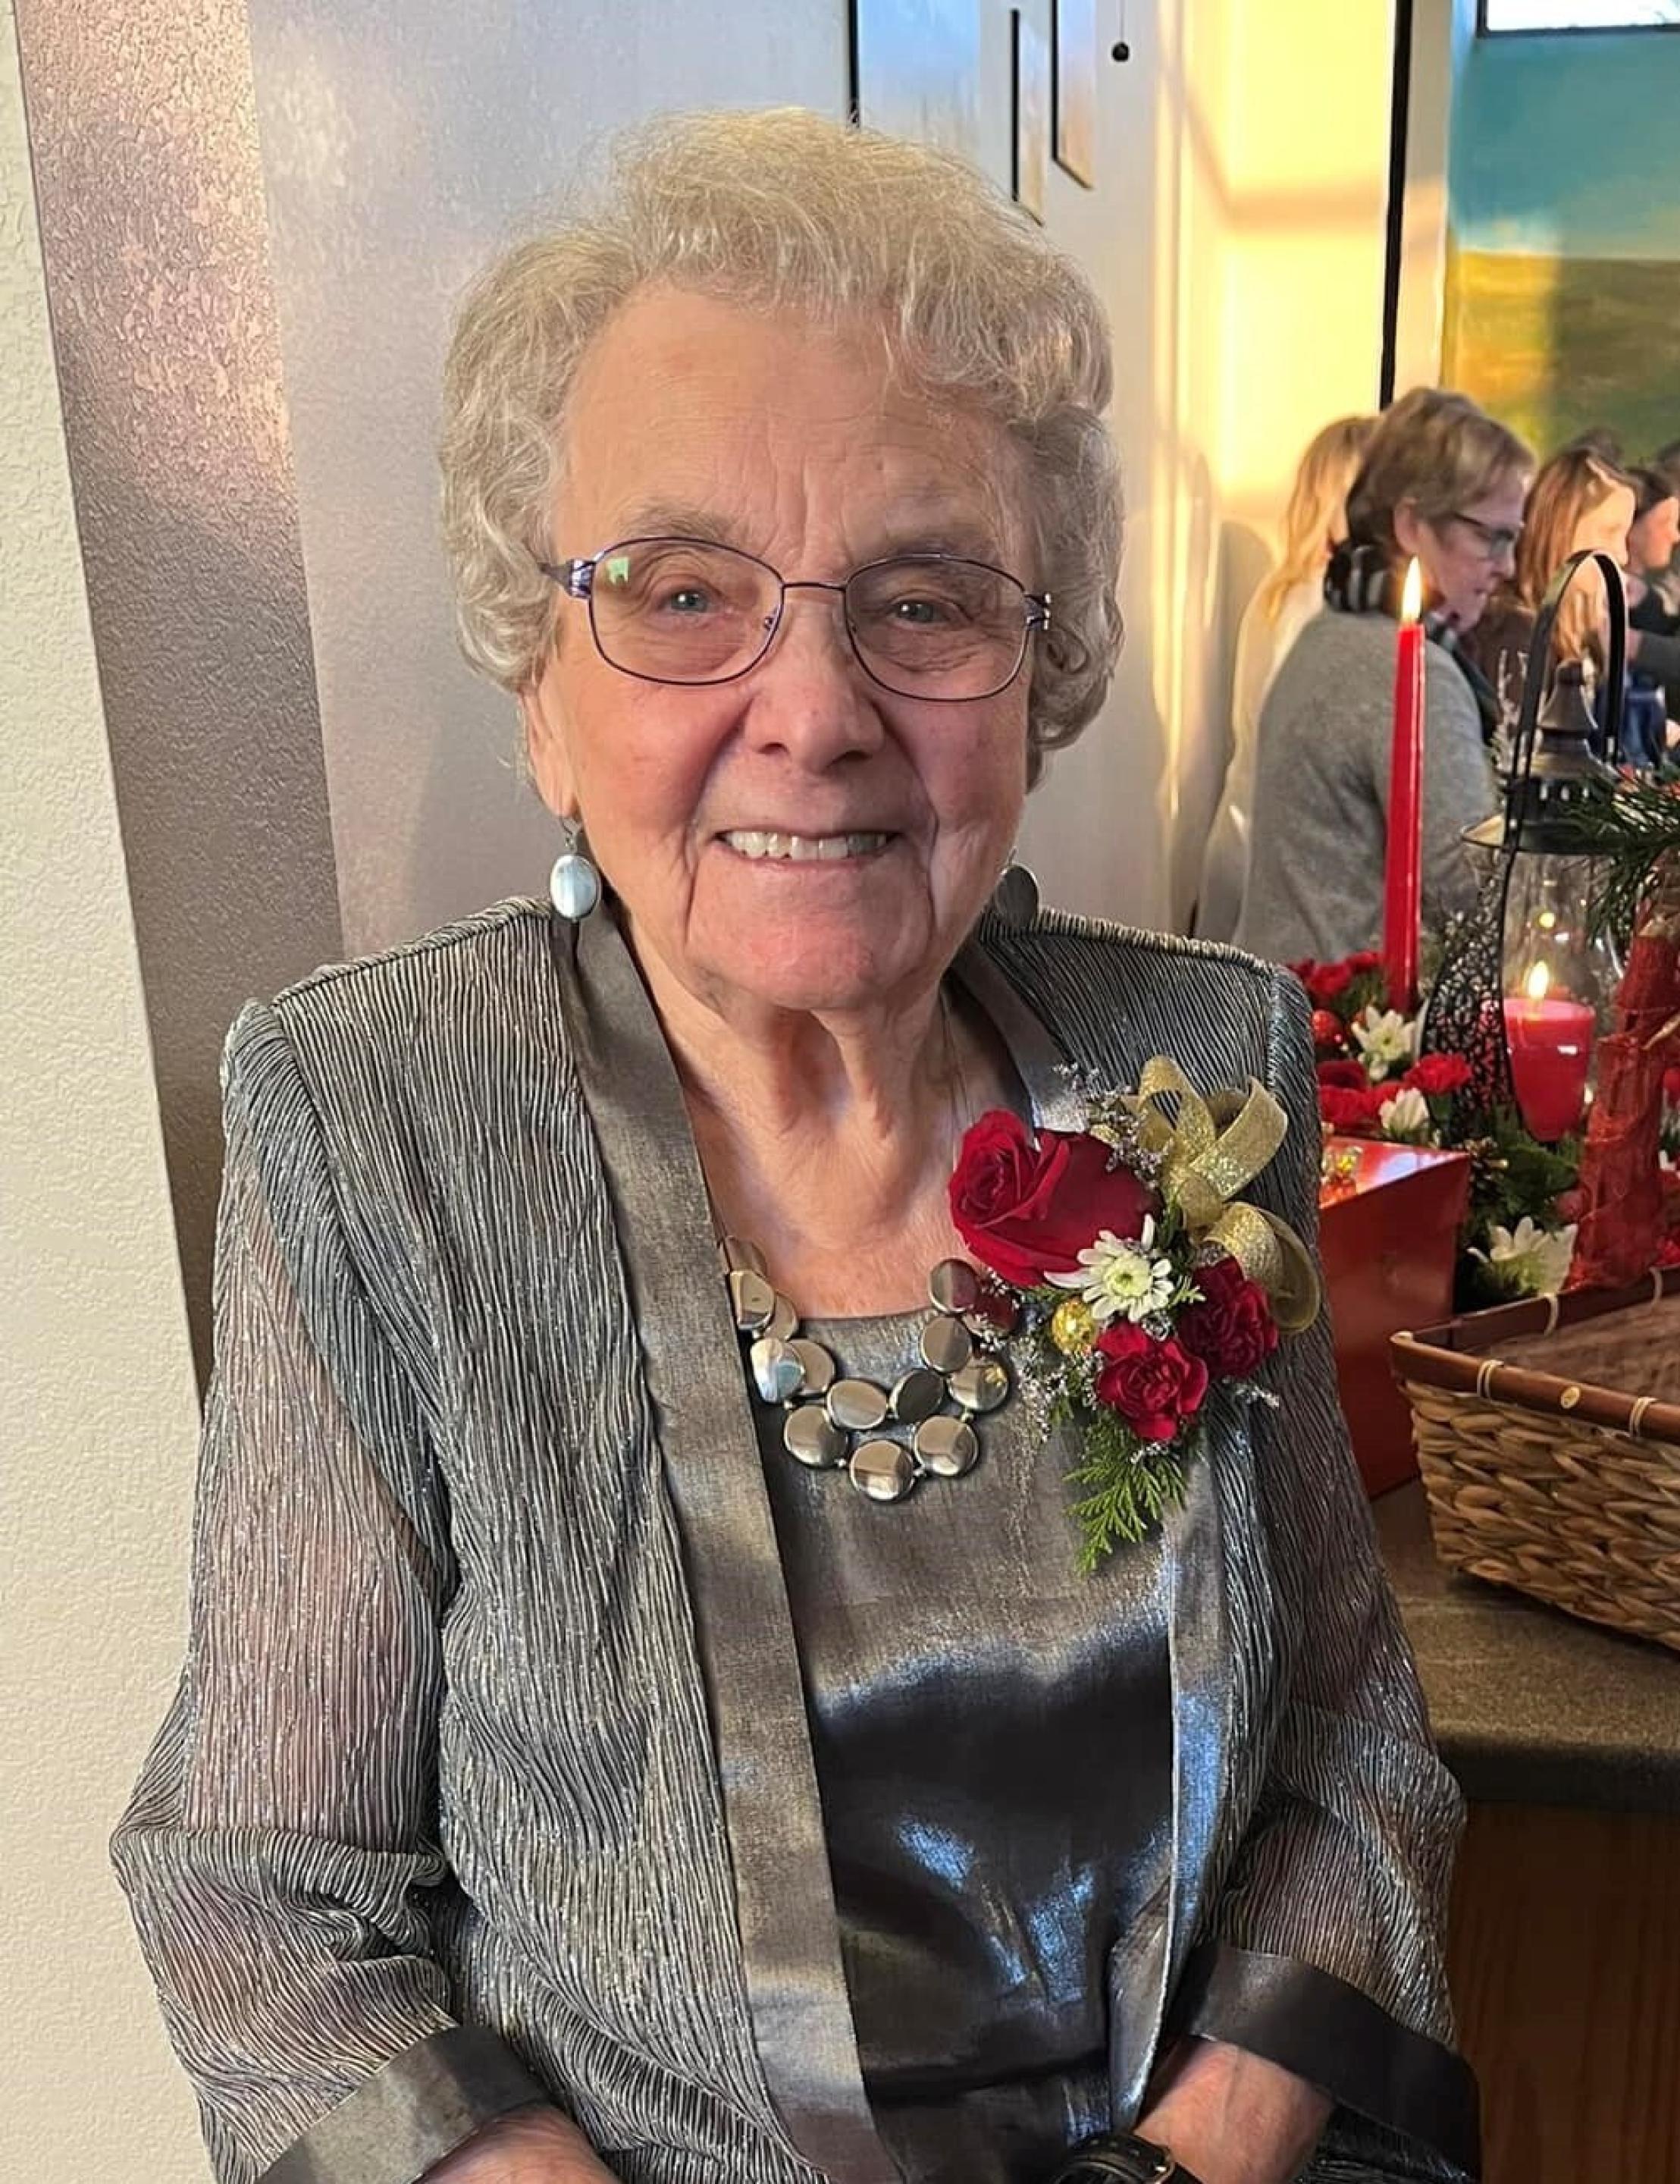 Alice Graber wearing a thrifted outfit to her 100th birthday party